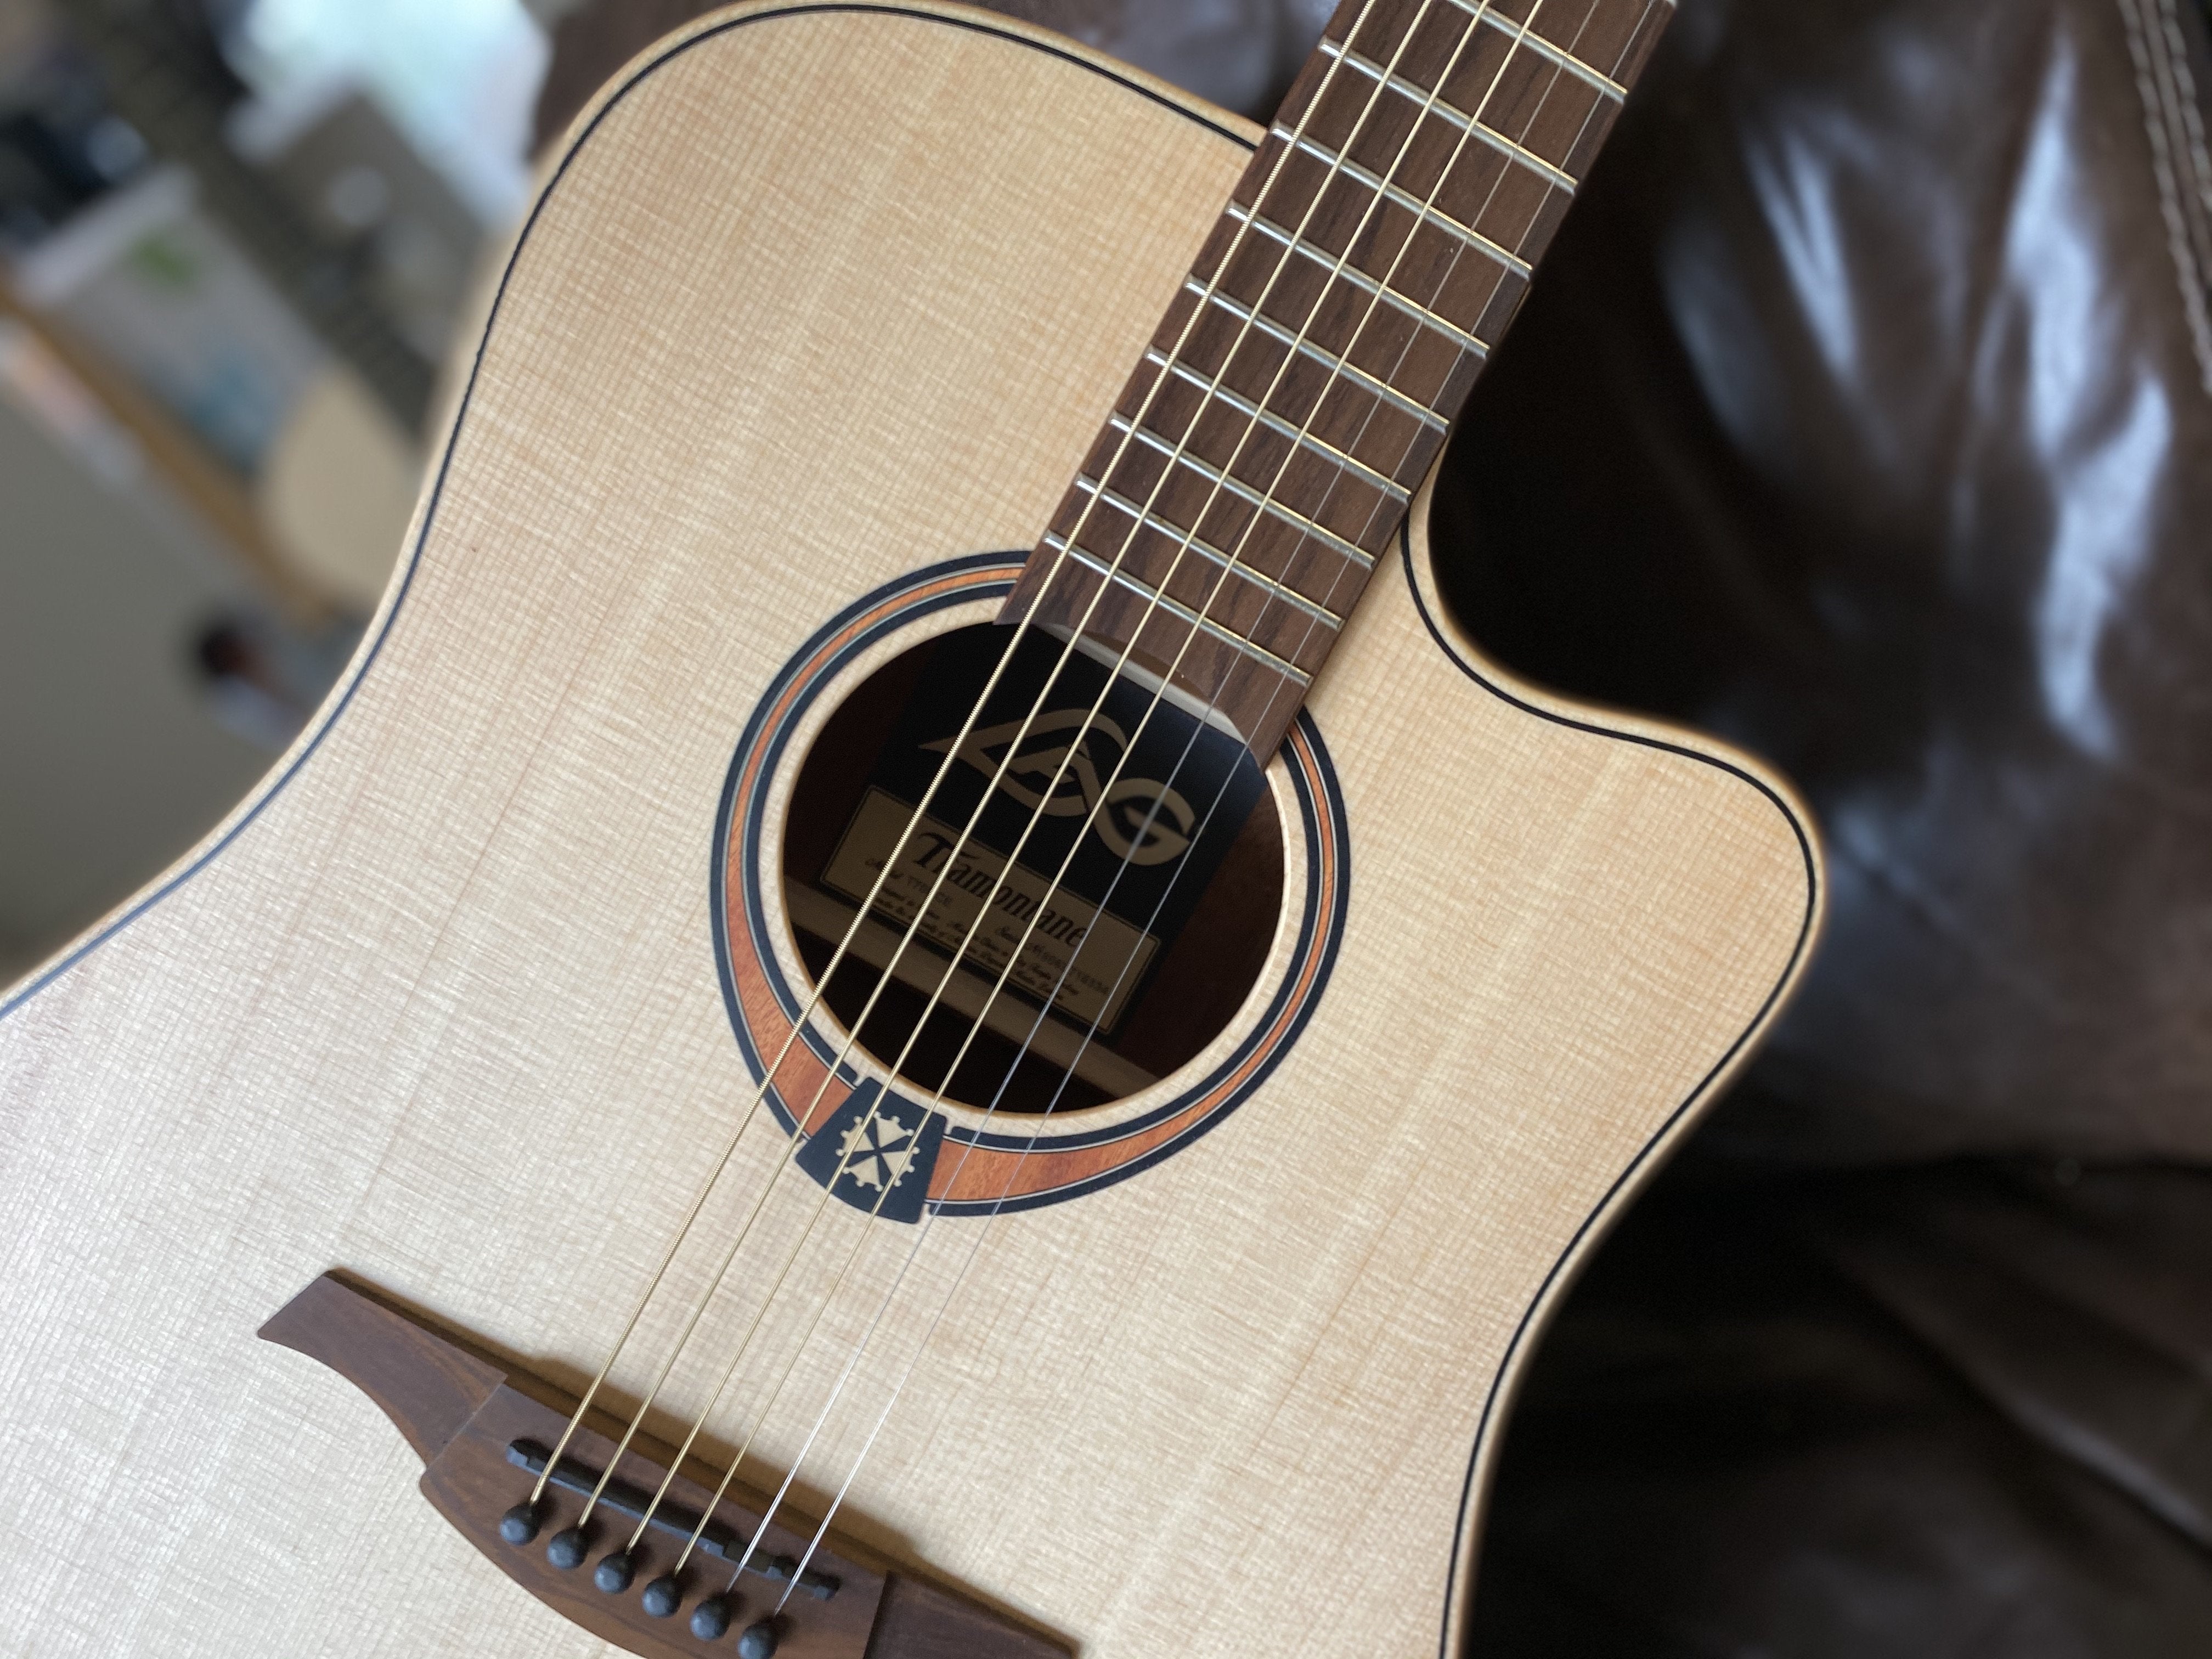 LAG TRAMONTANE 70 T70DCE DREADNOUGHT CUTAWAY ELECTRO, Electro Acoustic Guitar for sale at Richards Guitars.